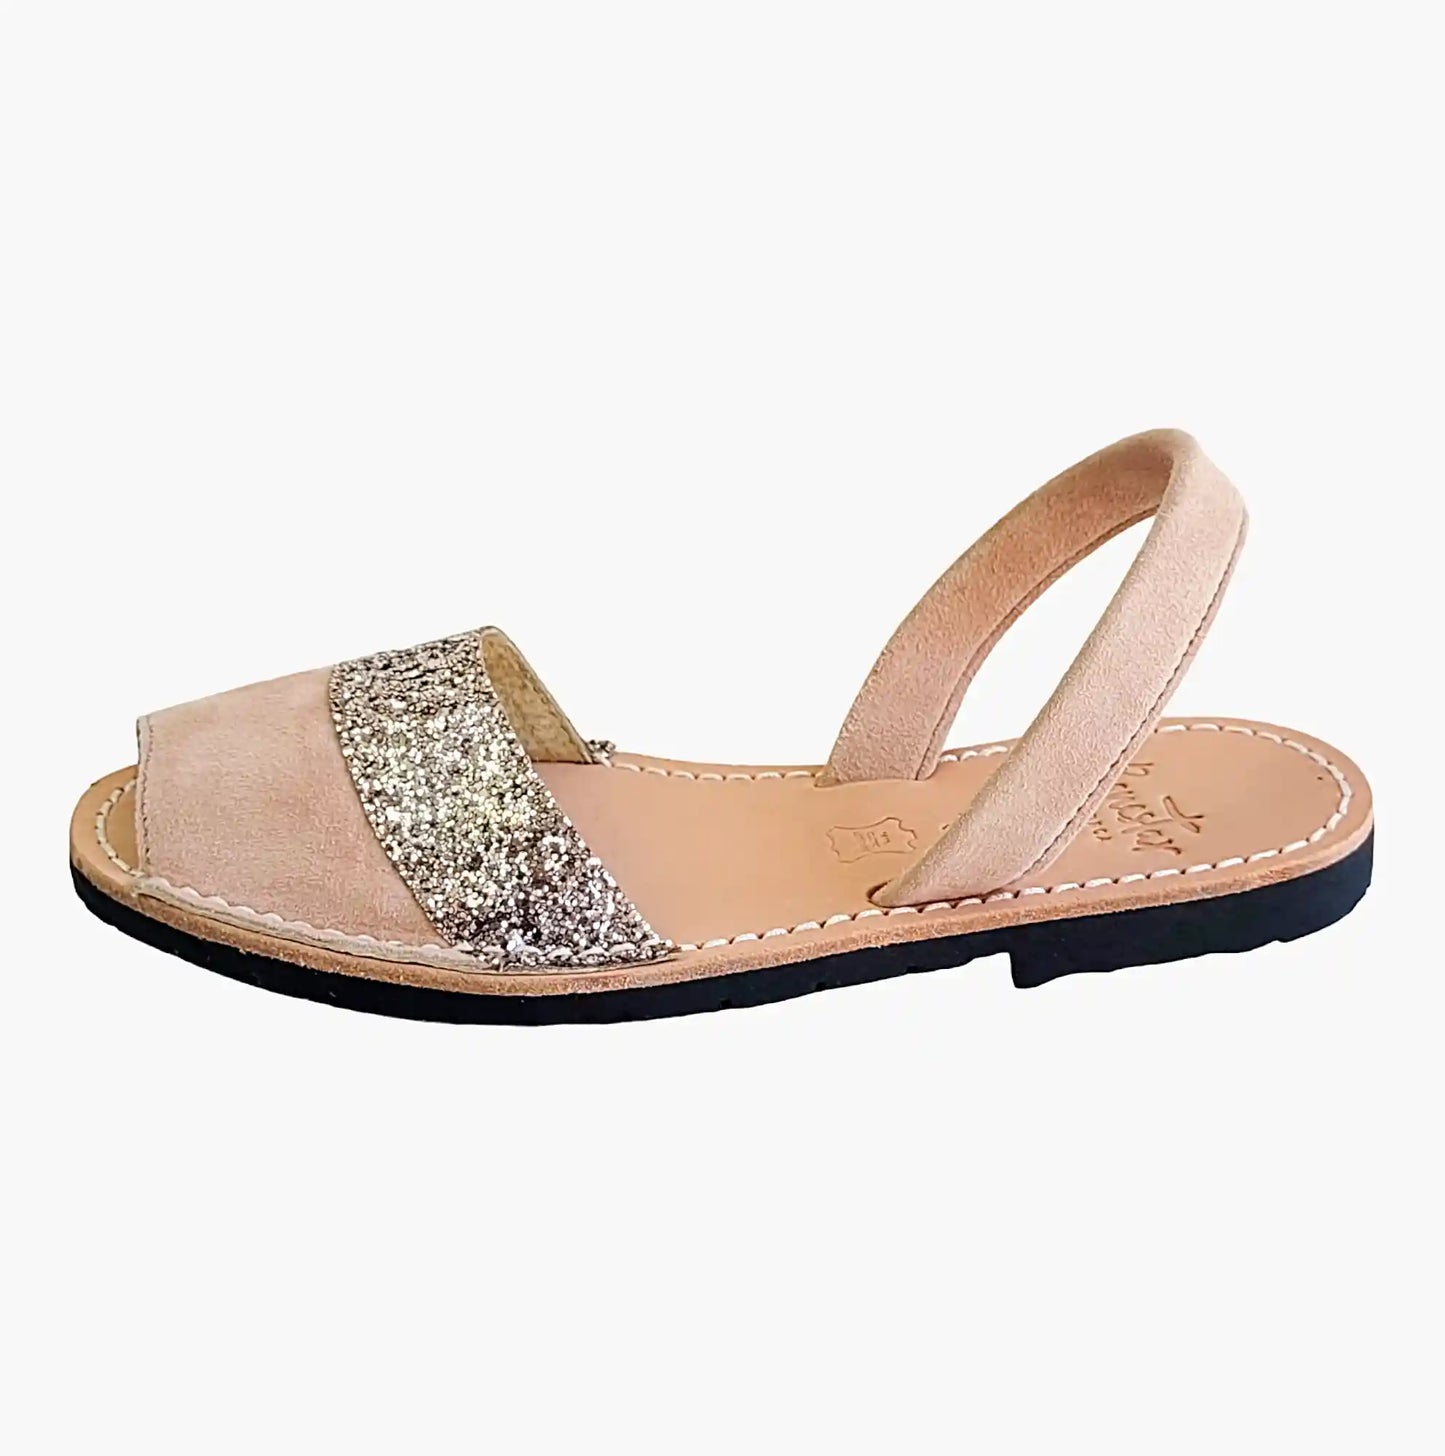 Avarcas-Duo-Blush-Pink-Sandals-side-view